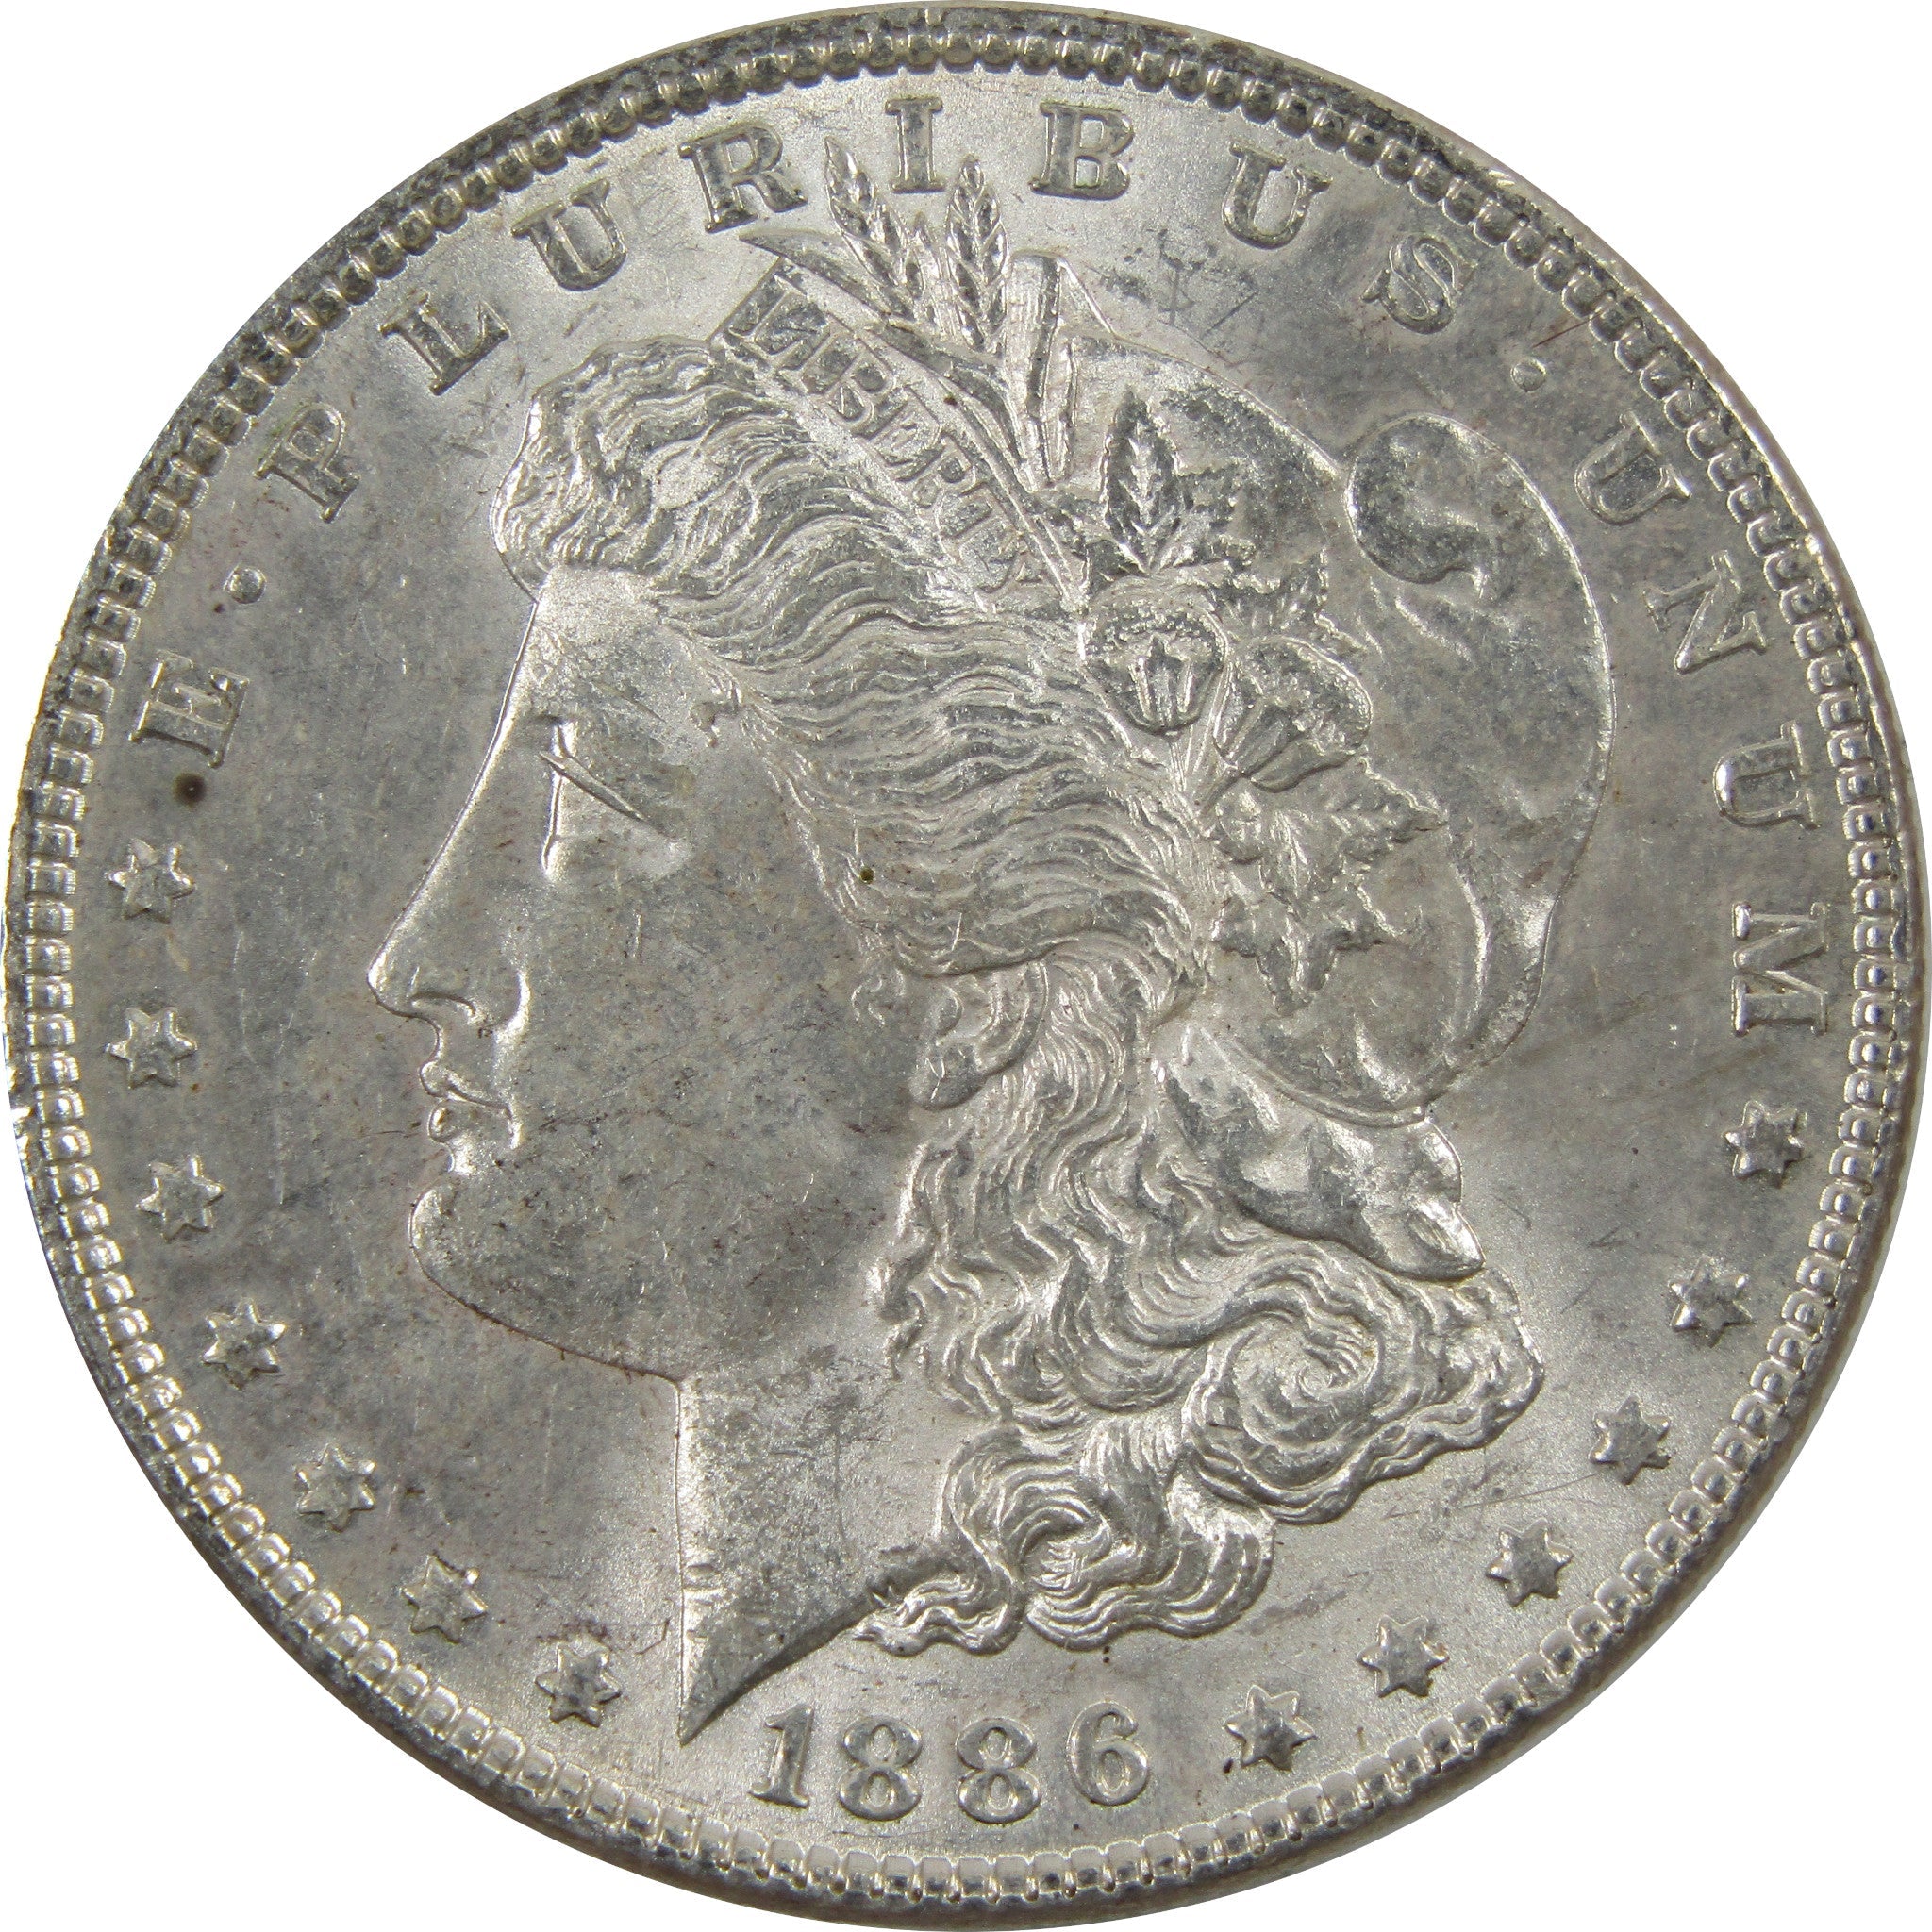 1886 Morgan Dollar AU About Uncirculated 90% Silver $1 Coin SKU:I5467 - Morgan coin - Morgan silver dollar - Morgan silver dollar for sale - Profile Coins &amp; Collectibles